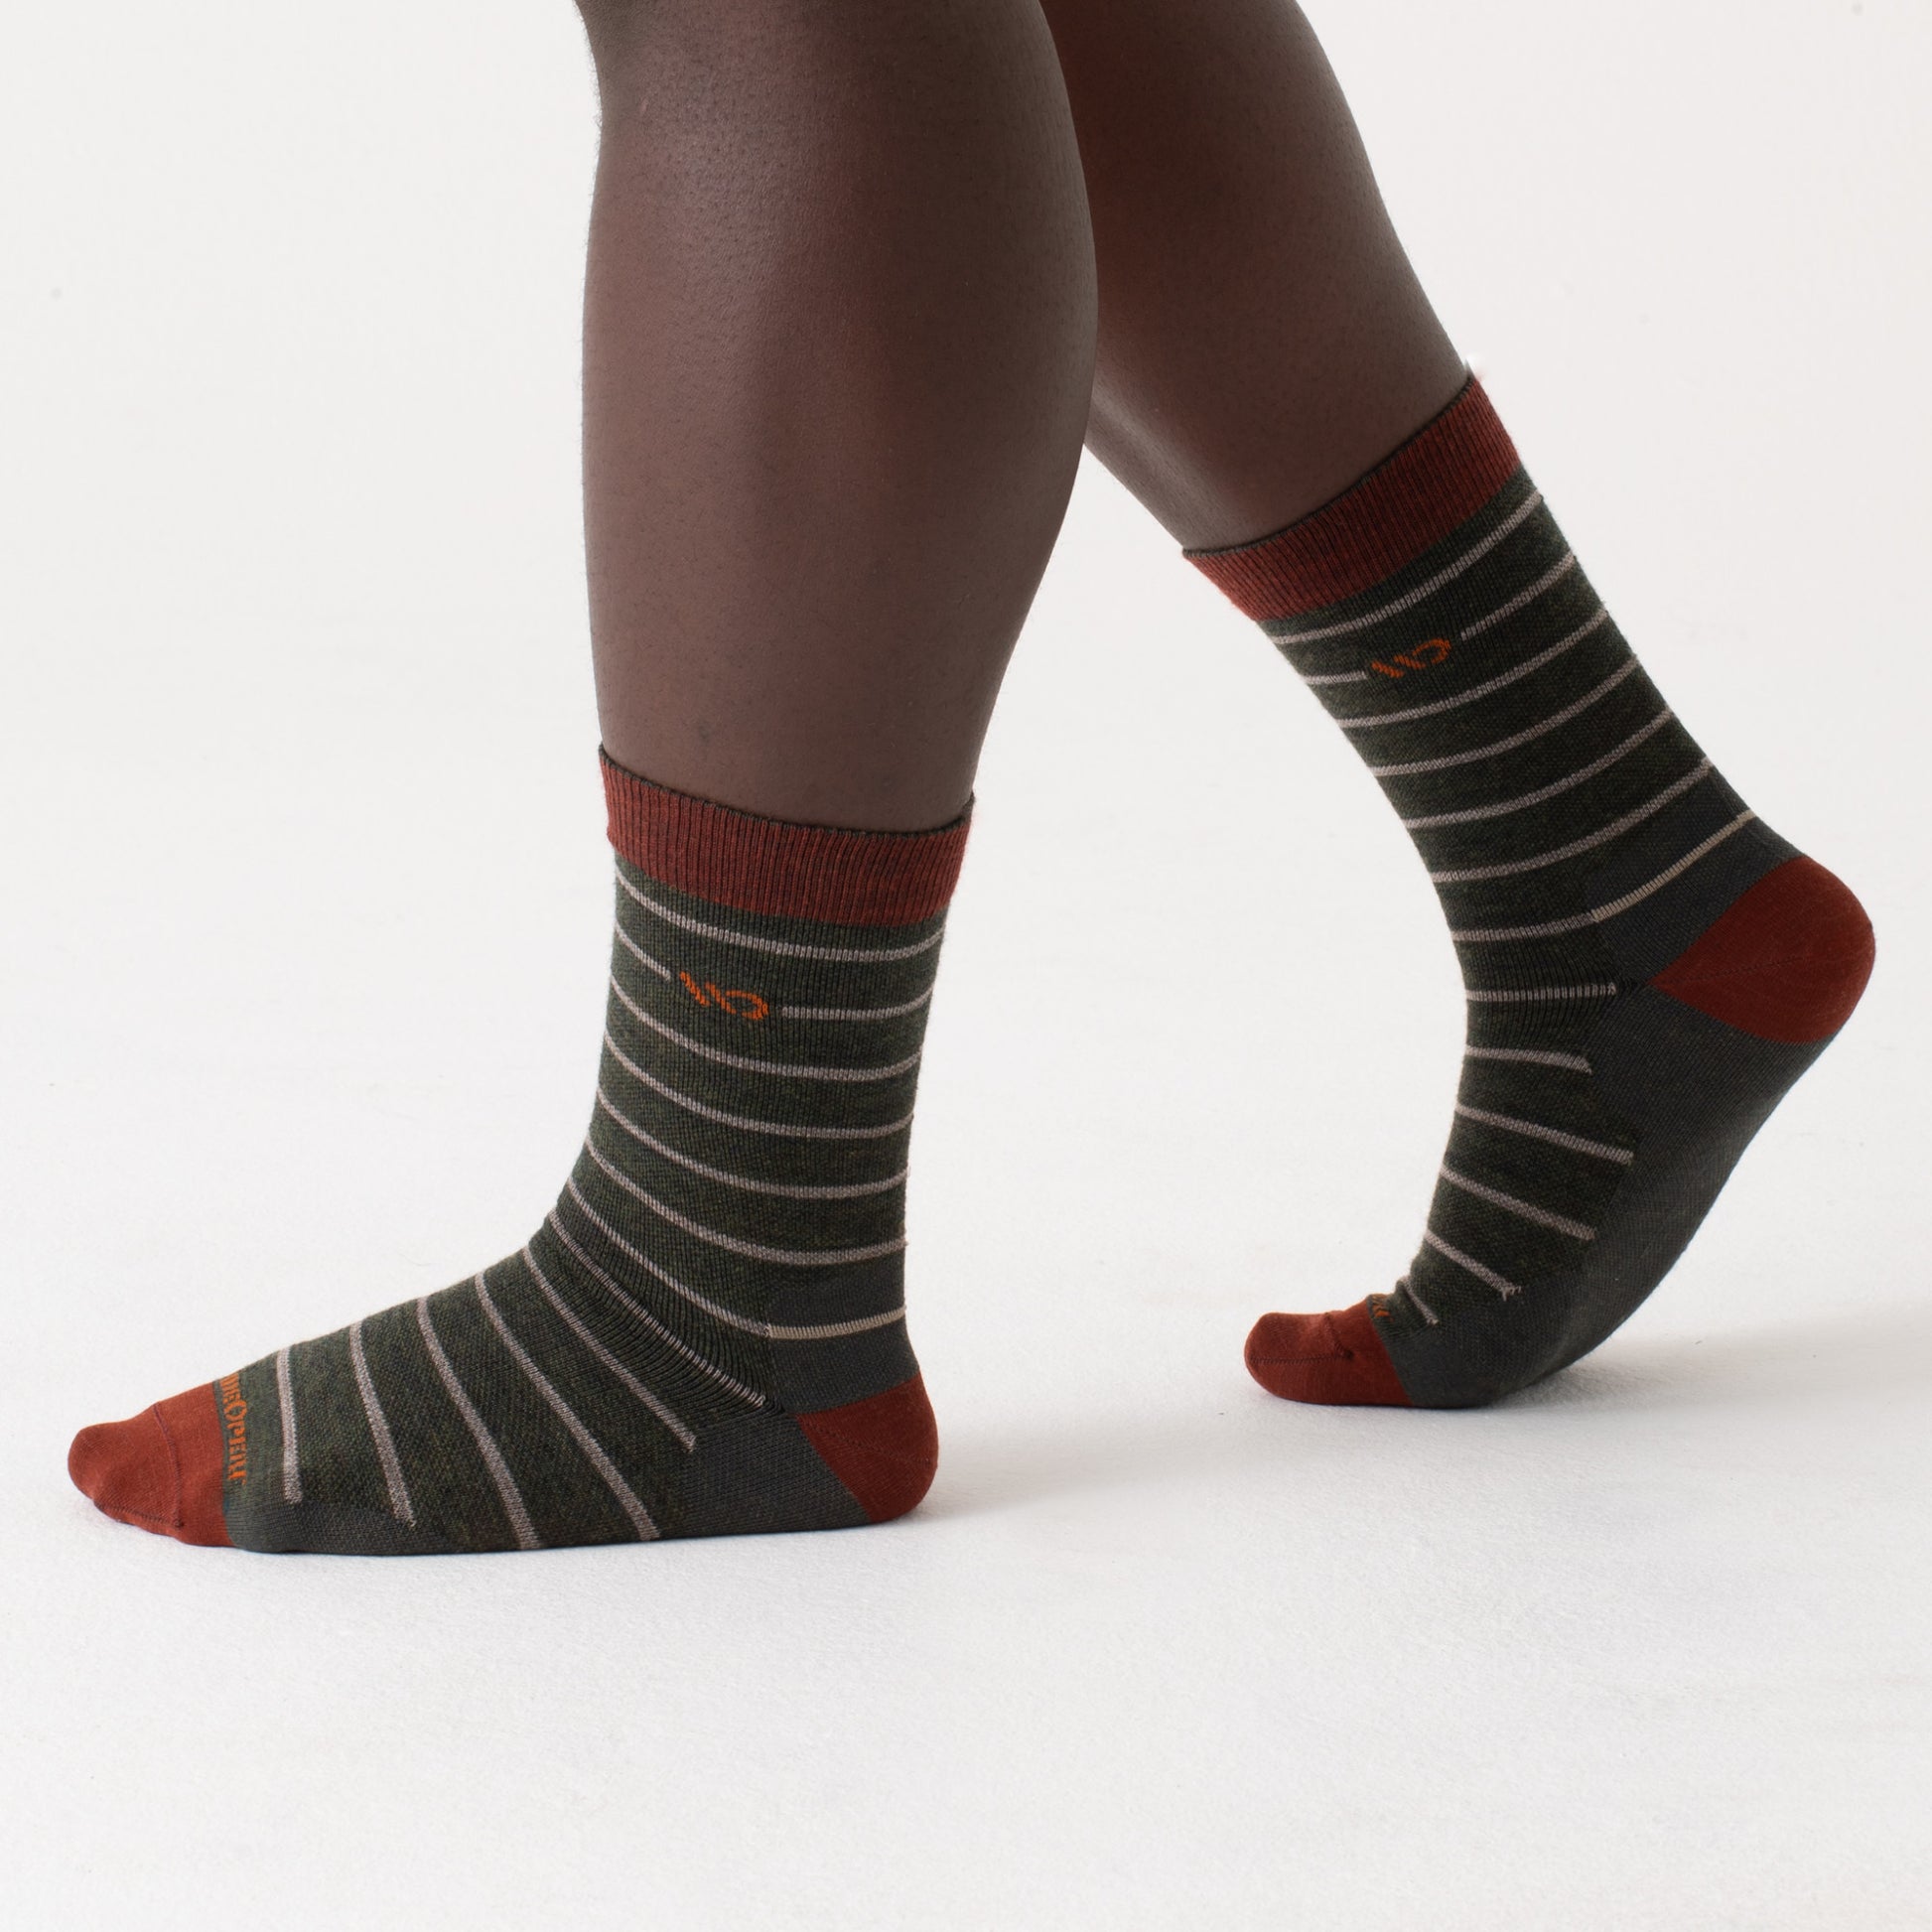 On body Crew socks with maroon heel/toe, orange logo, forest body and gray stripes--Forest